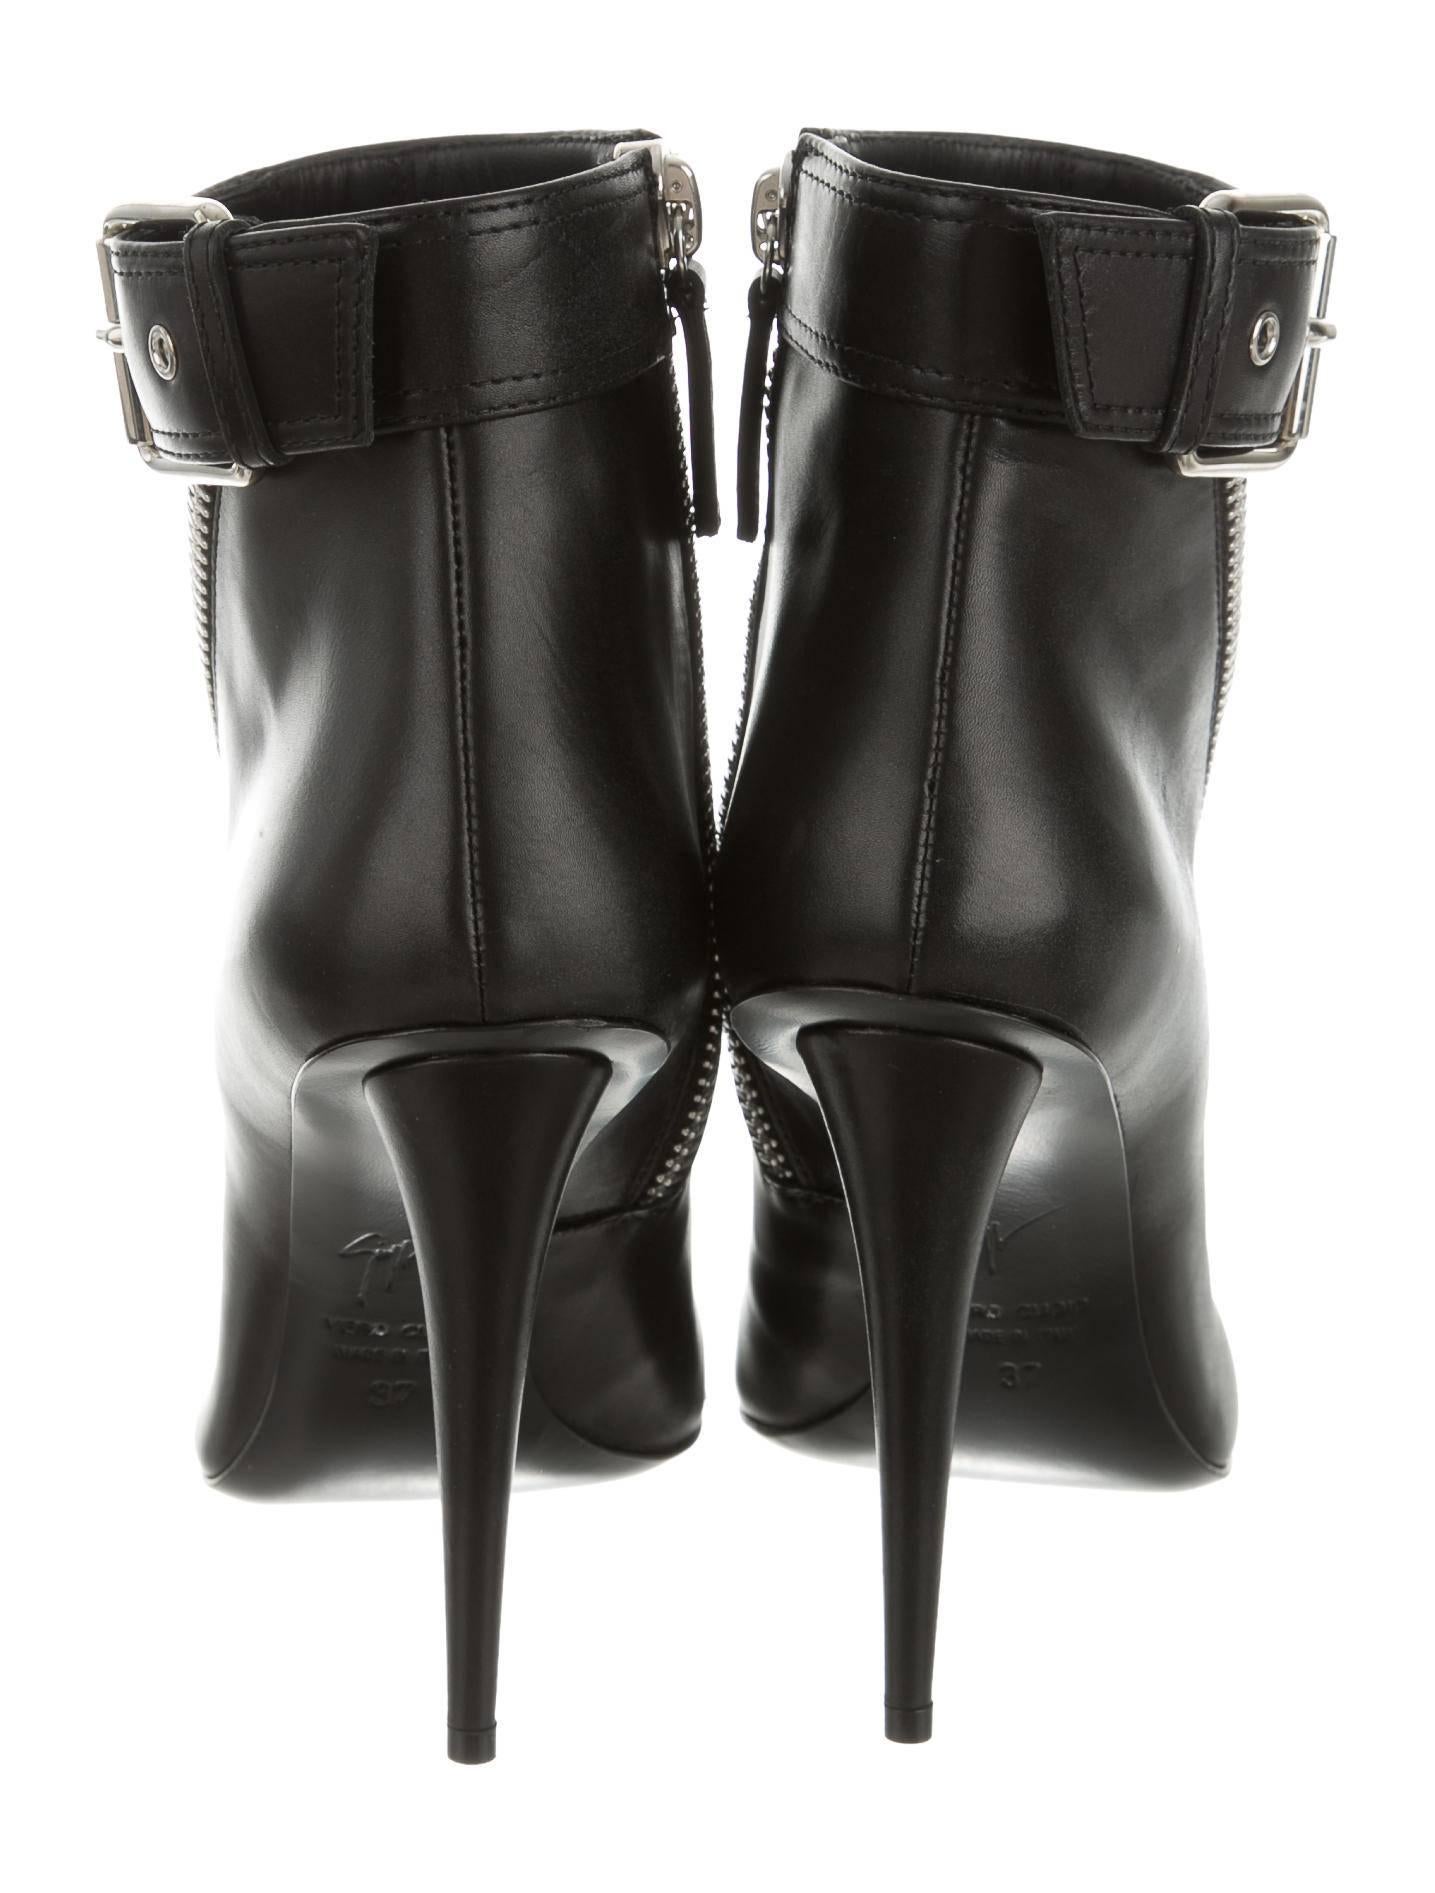 Women's Giuseppe Zanotti NEW & SOLD OUT Black Leather Silver Ankle Booties in Box